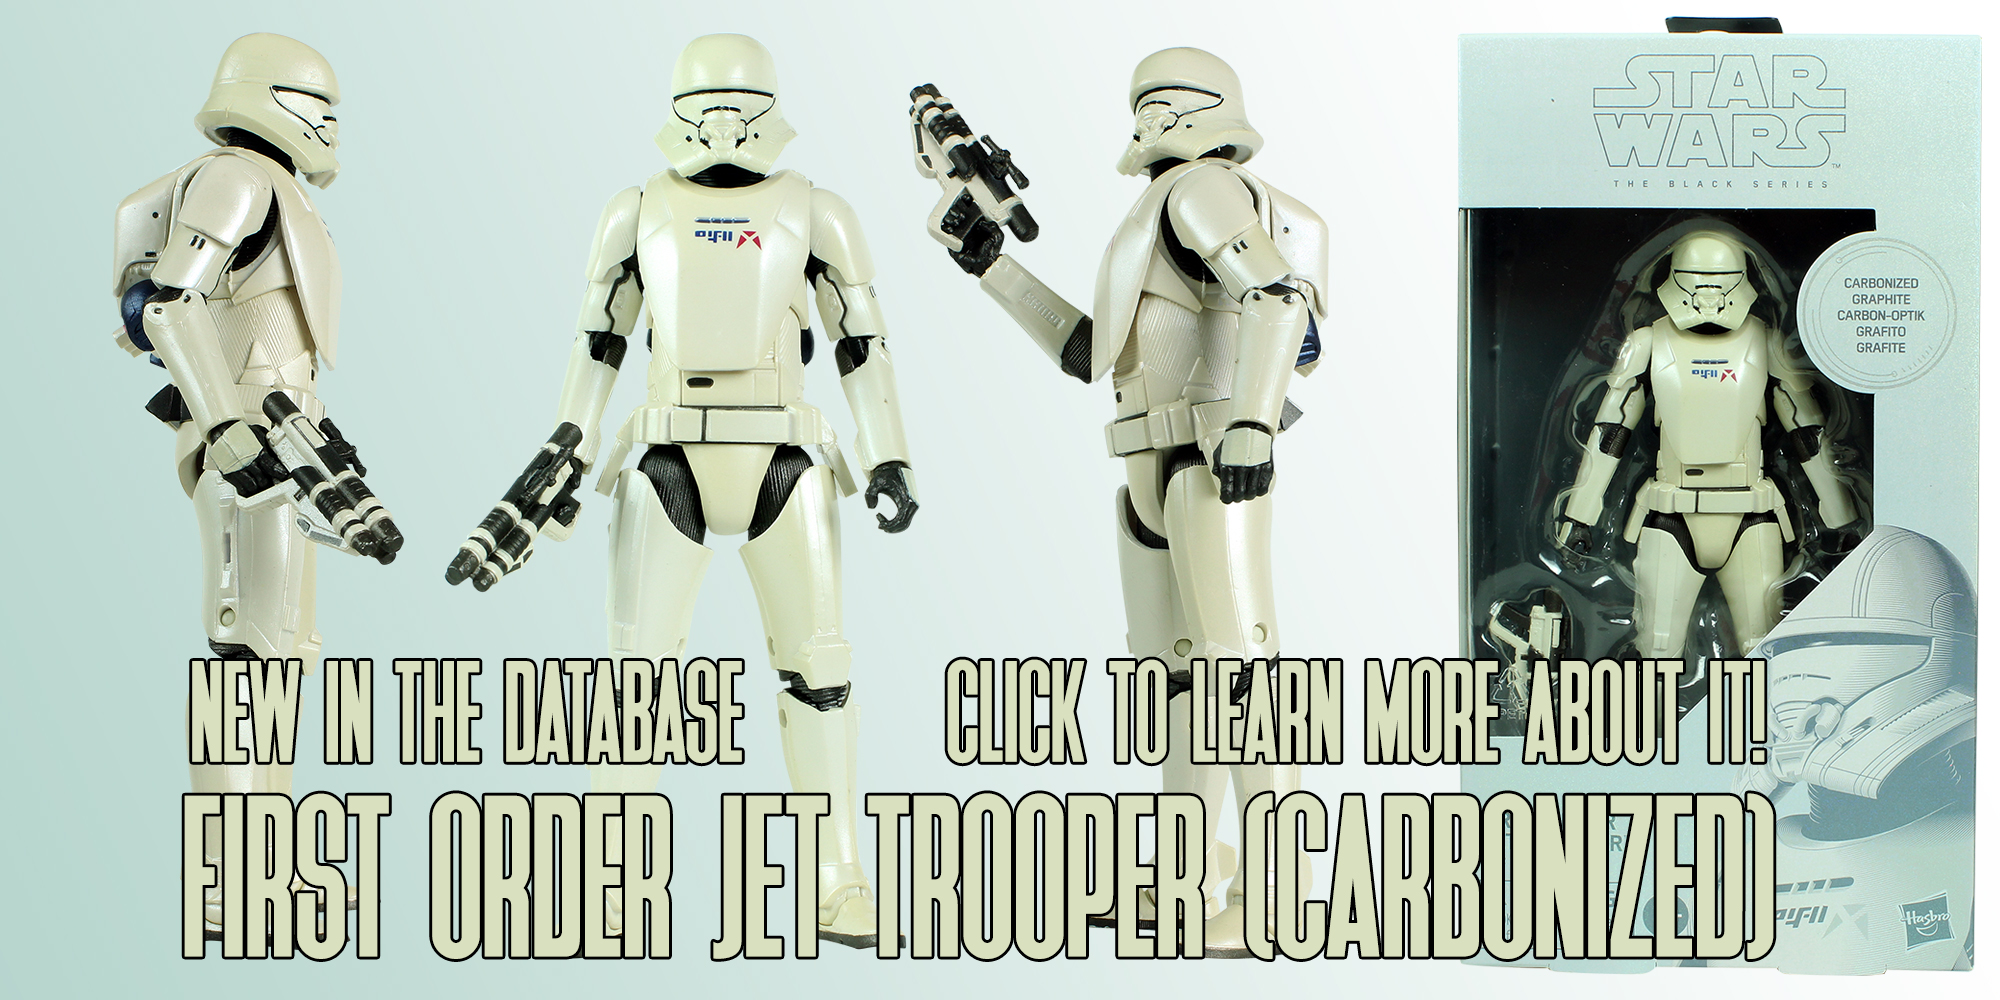 Now In The Database: First Order Jet Trooper Carbonized